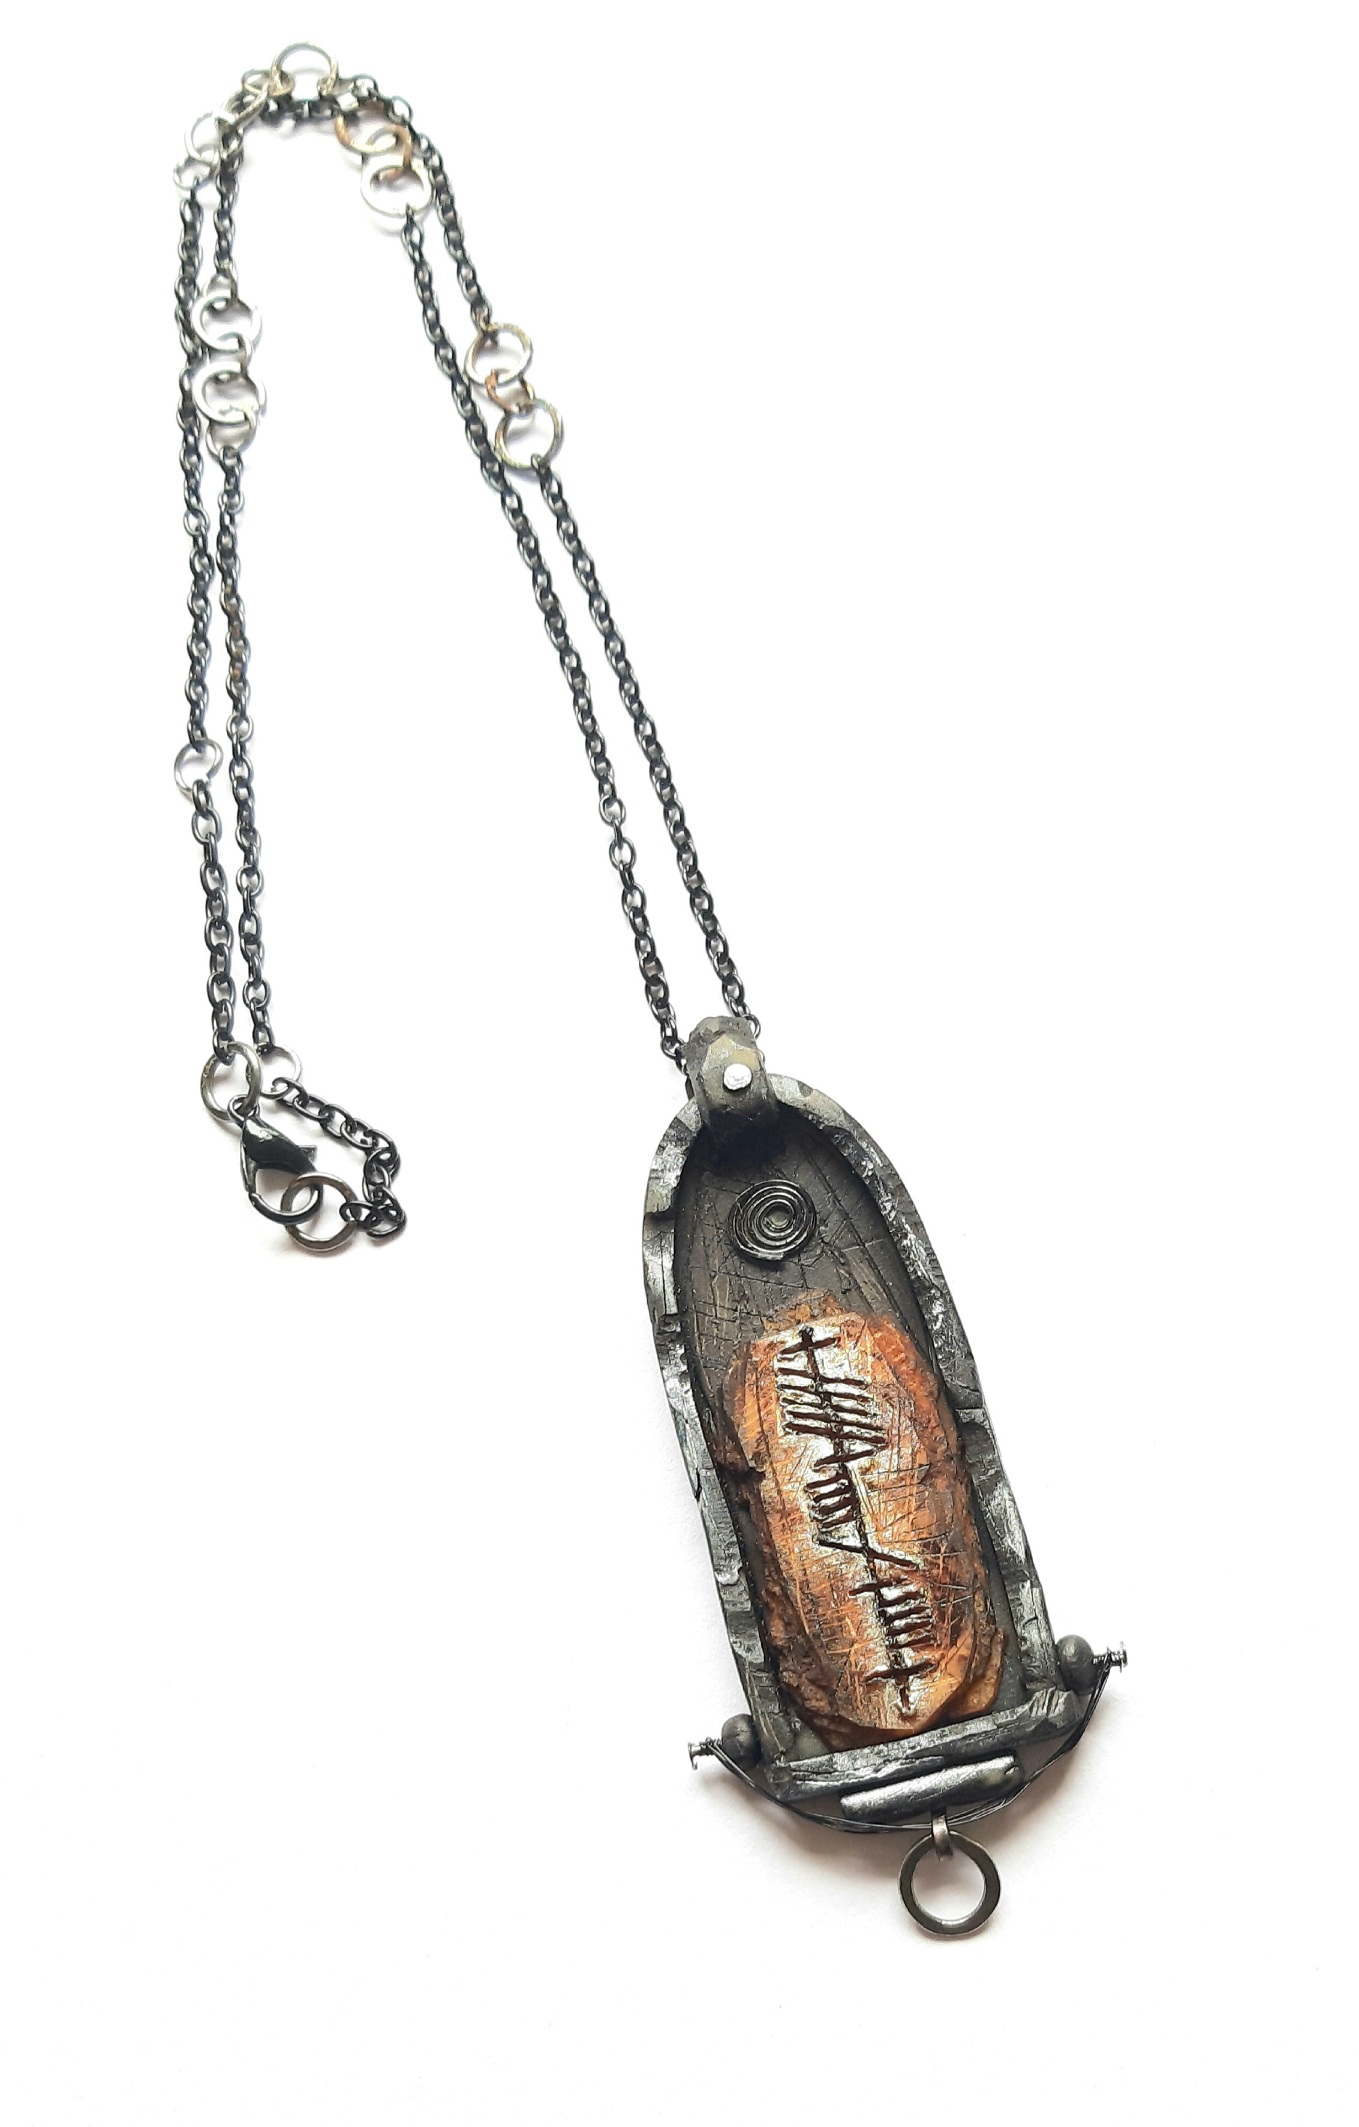 Anam Cara/Soul Friend Cathedral Necklace